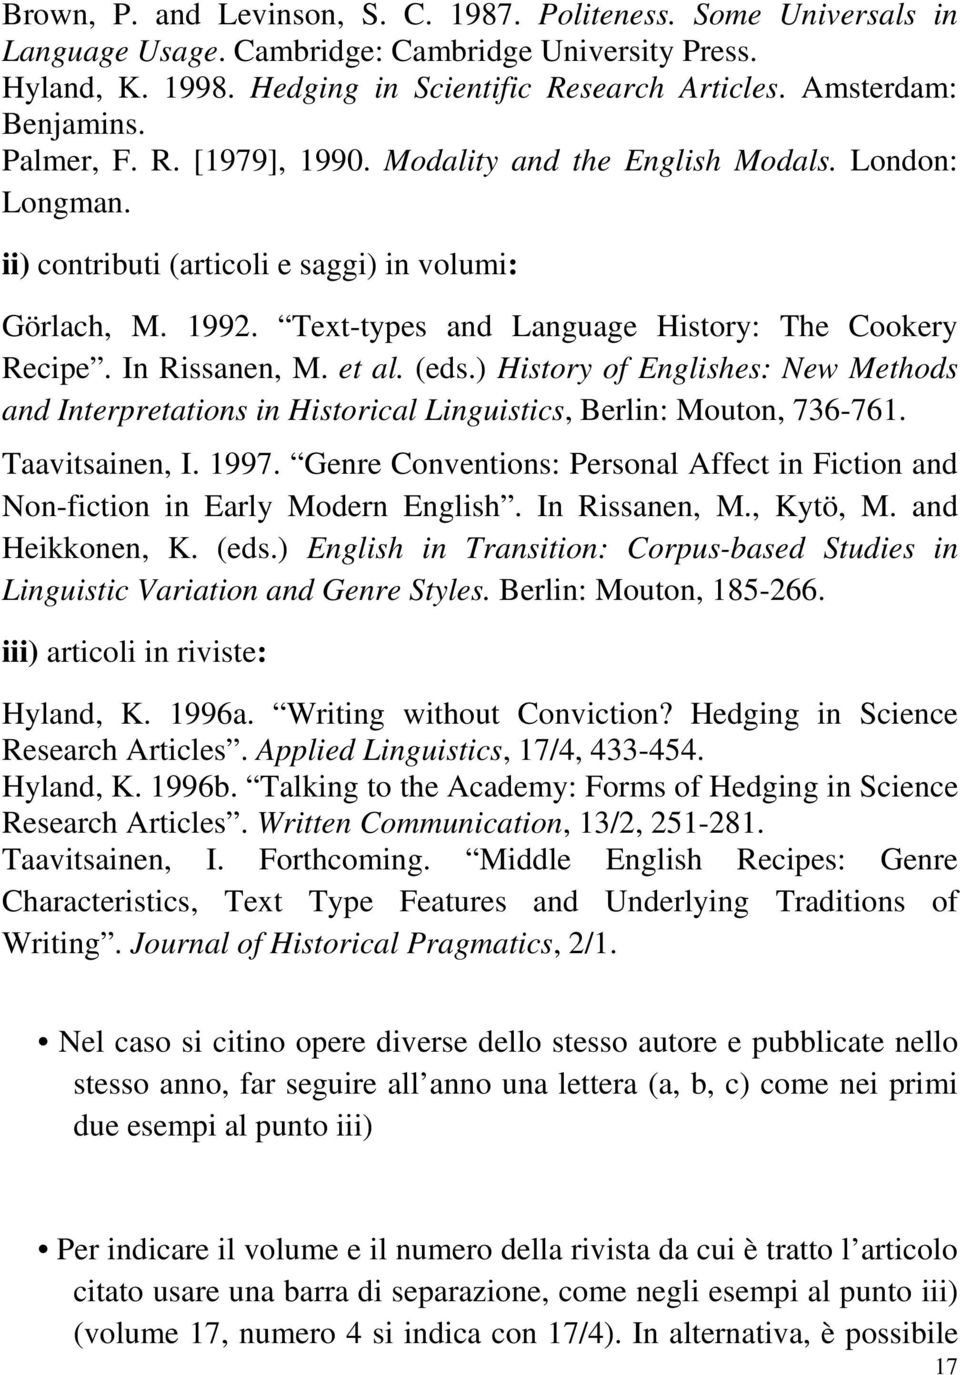 Text-types and Language History: The Cookery Recipe. In Rissanen, M. et al. (eds.) History of Englishes: New Methods and Interpretations in Historical Linguistics, Berlin: Mouton, 736-761.